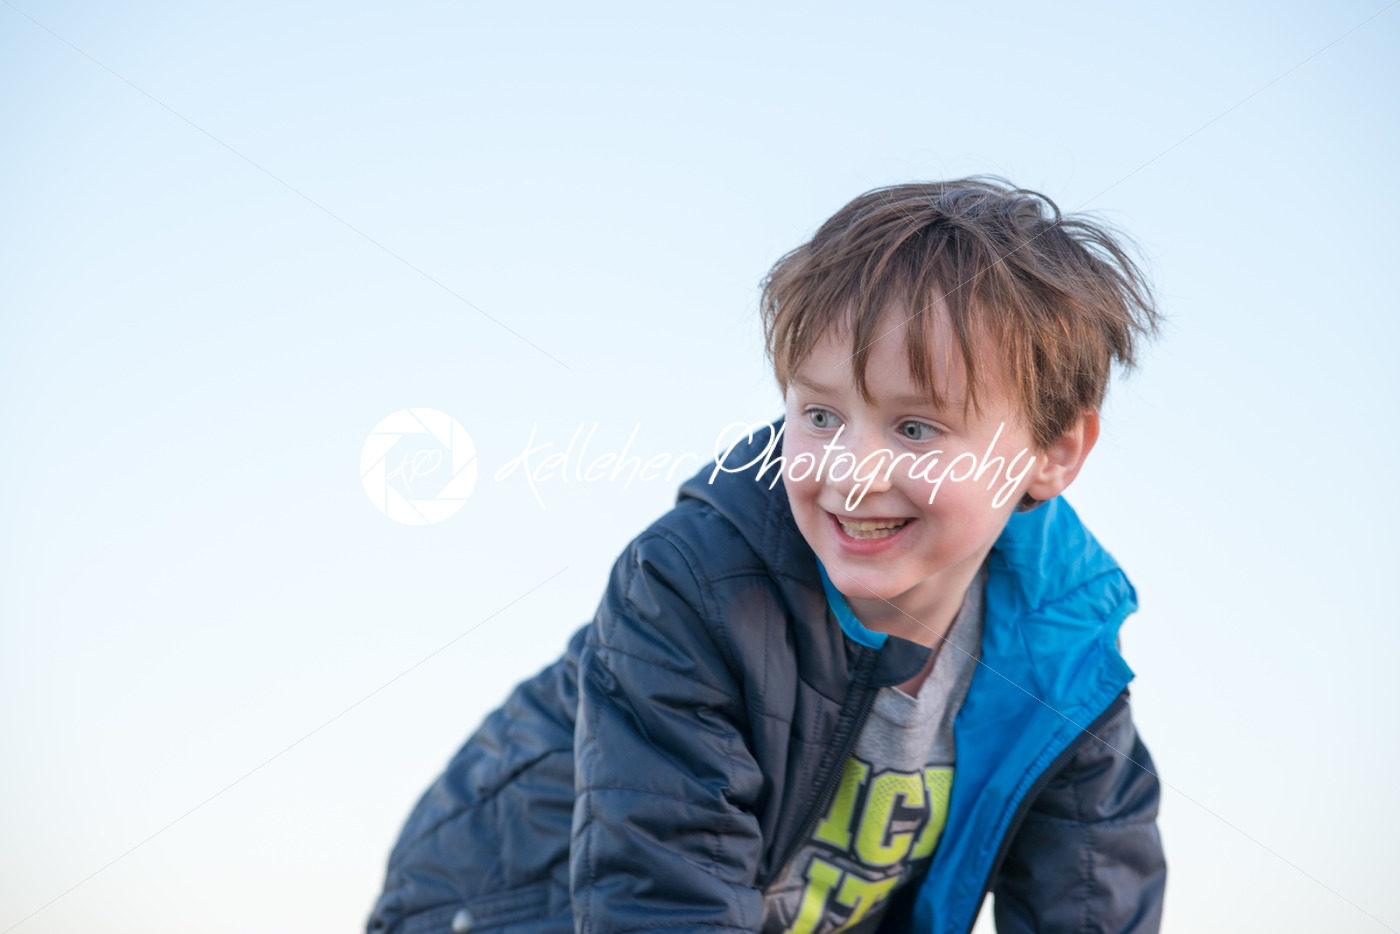 Handsome young boy outside smiling at sunset golden hour - Kelleher Photography Store